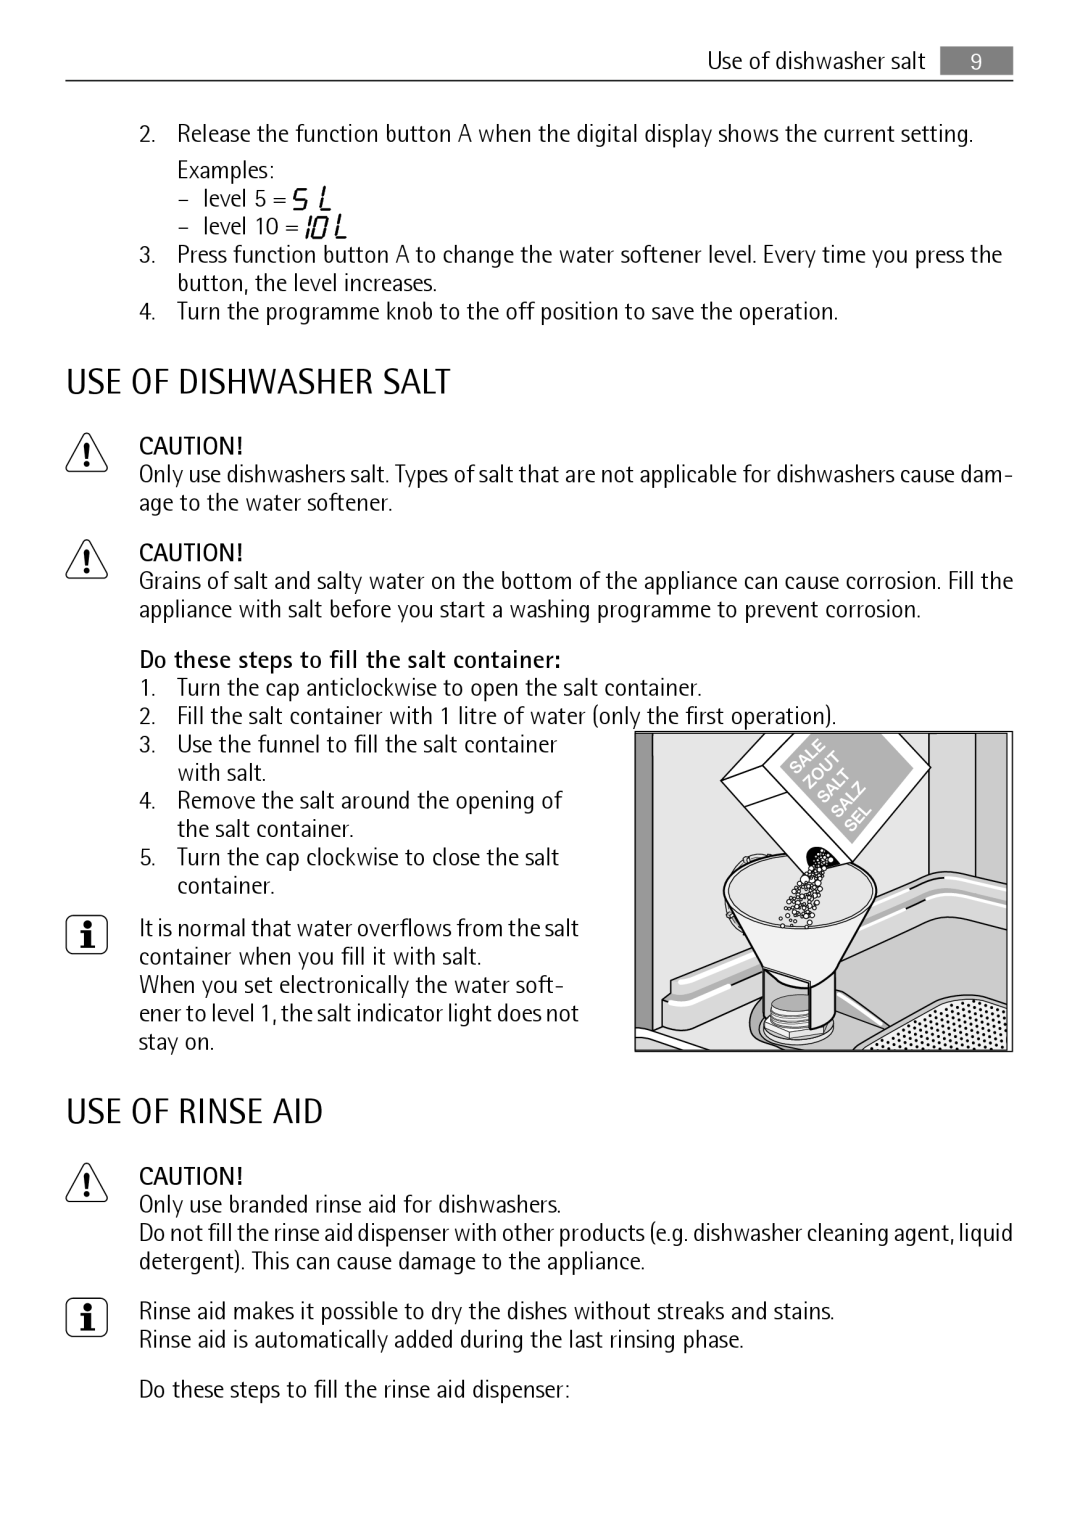 AEG 45003 user manual Use Of Dishwasher Salt, Use Of Rinse Aid, Do these steps to fill the salt container 